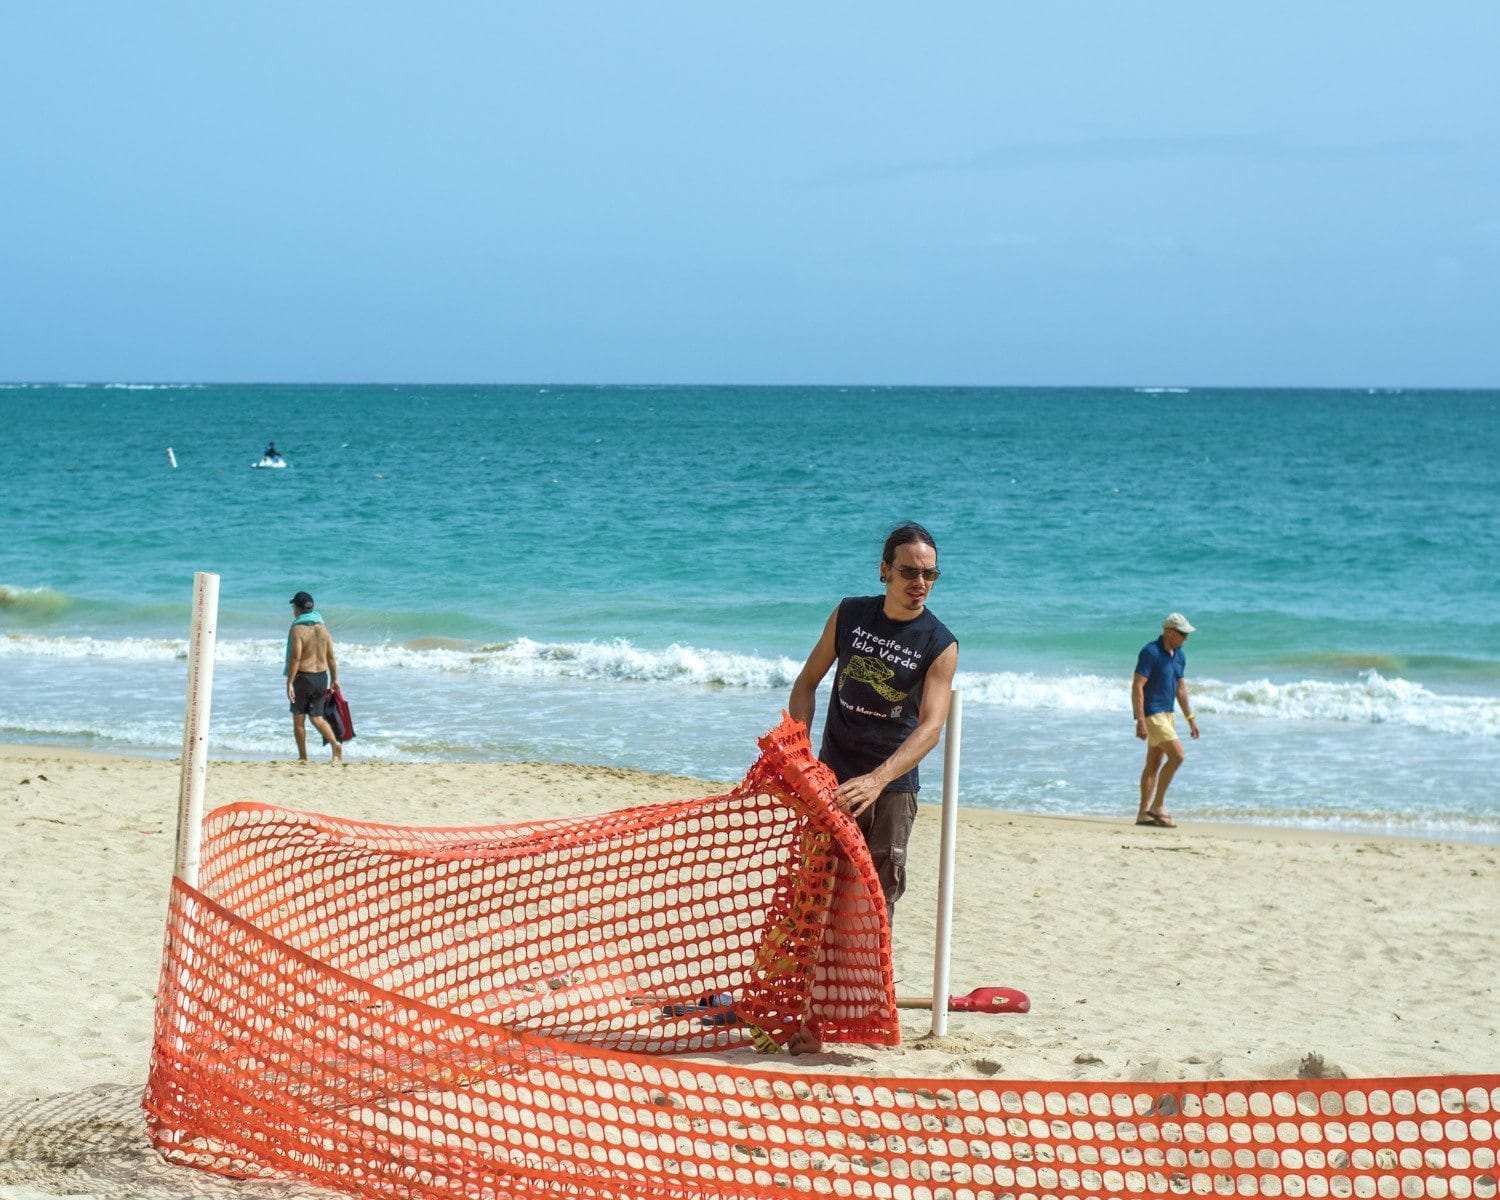 Diego setting up a Fence to Protect a Sea Turtle Nest.